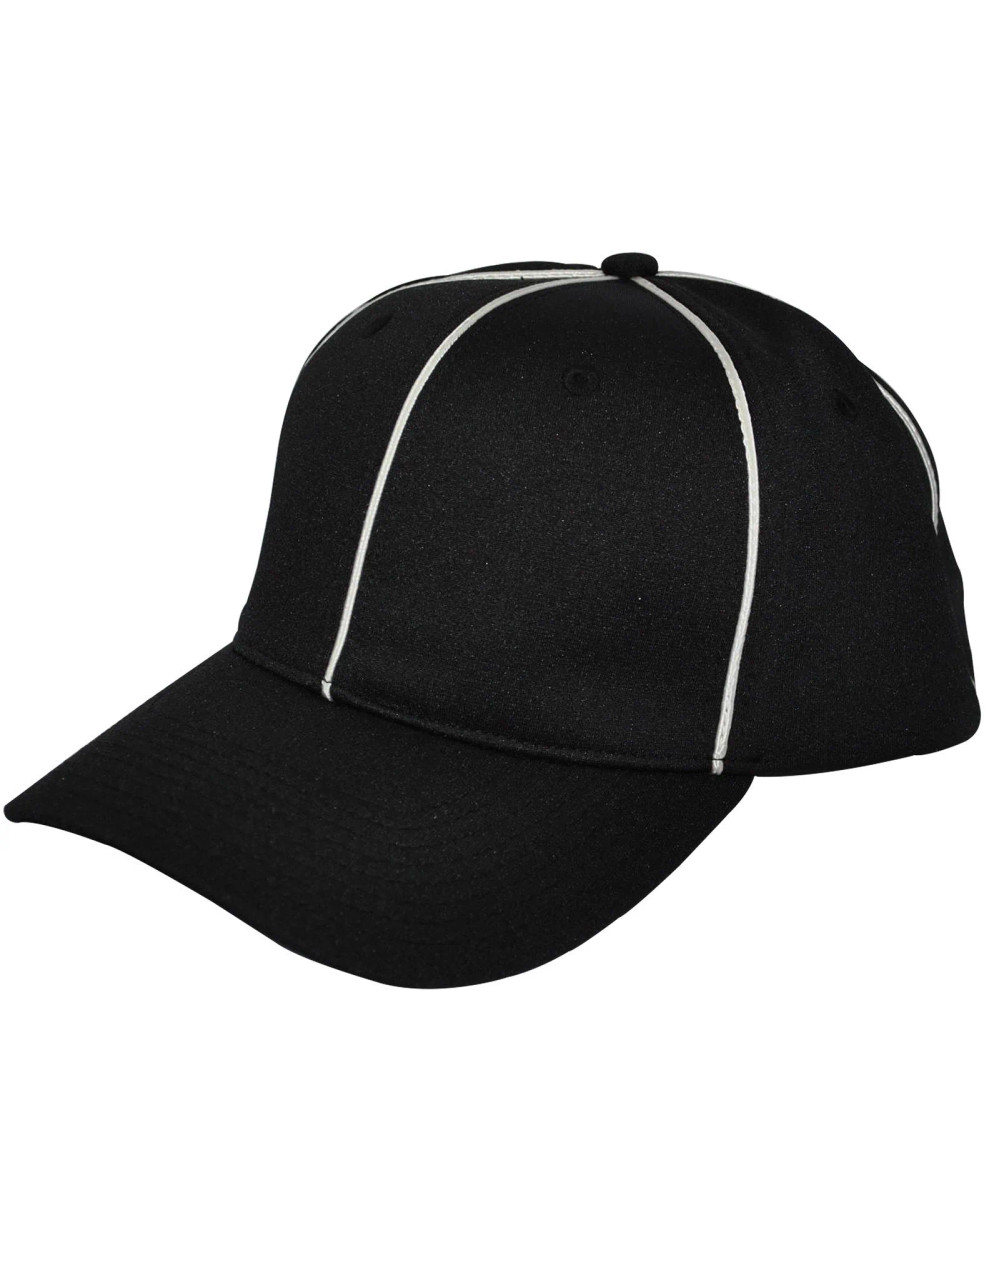 Smitty Hat Products Get Official Fit Piping Black Flex - White Football w/